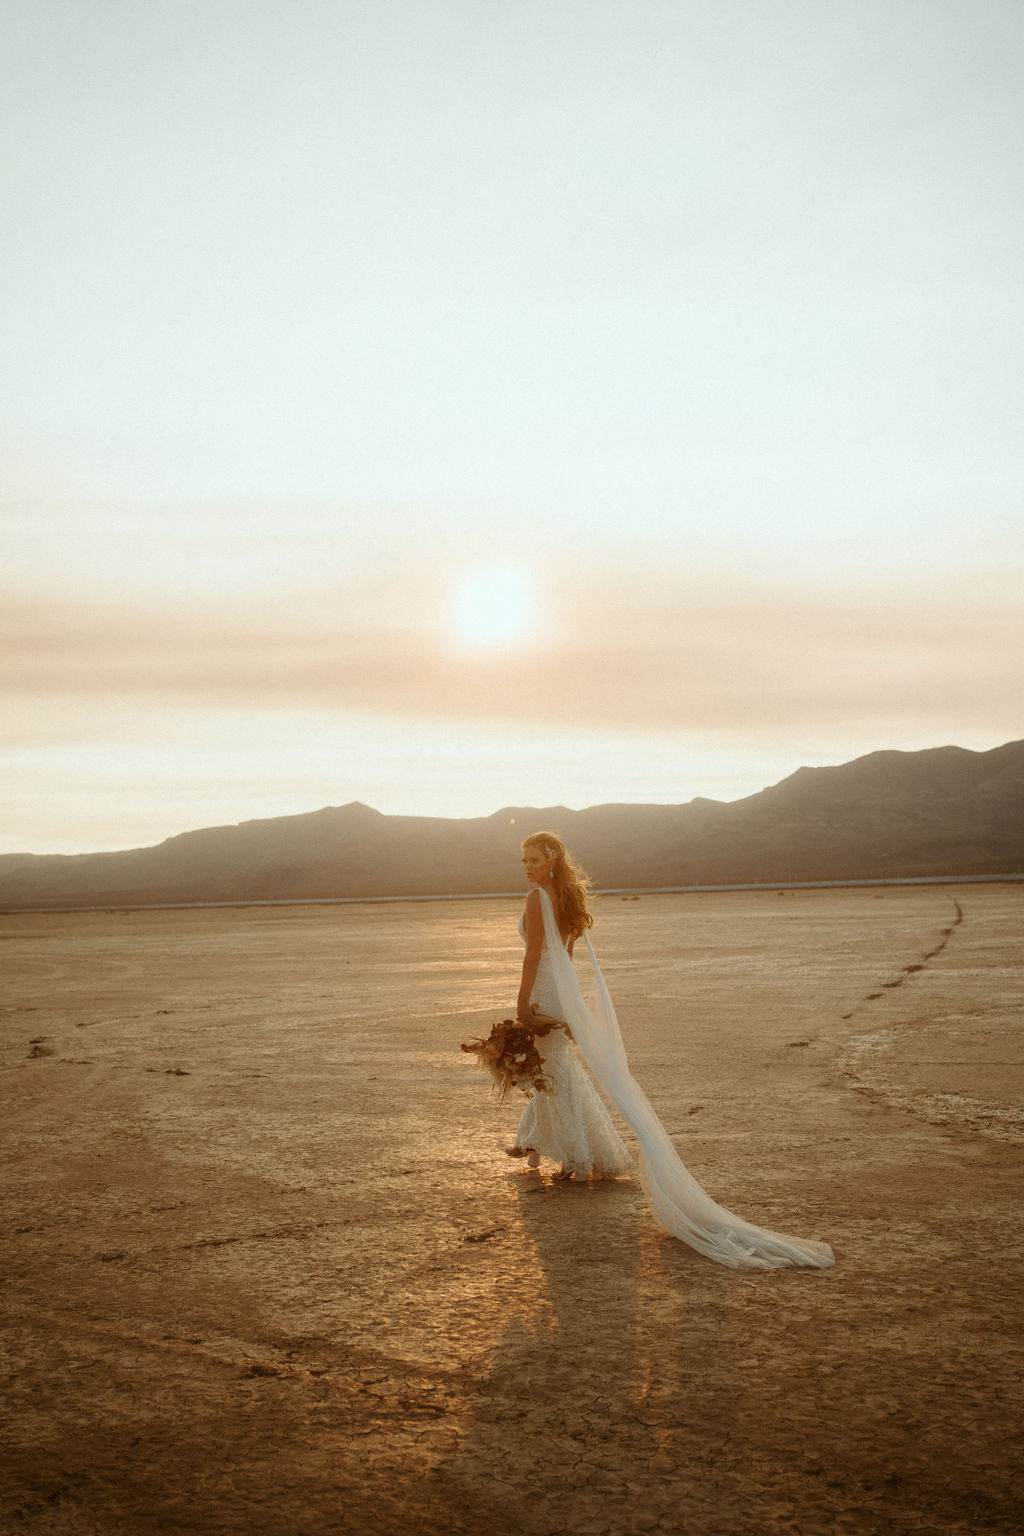 Bride in Bridal Cape with Bouquet at Dry Lake Bed during Sunset 